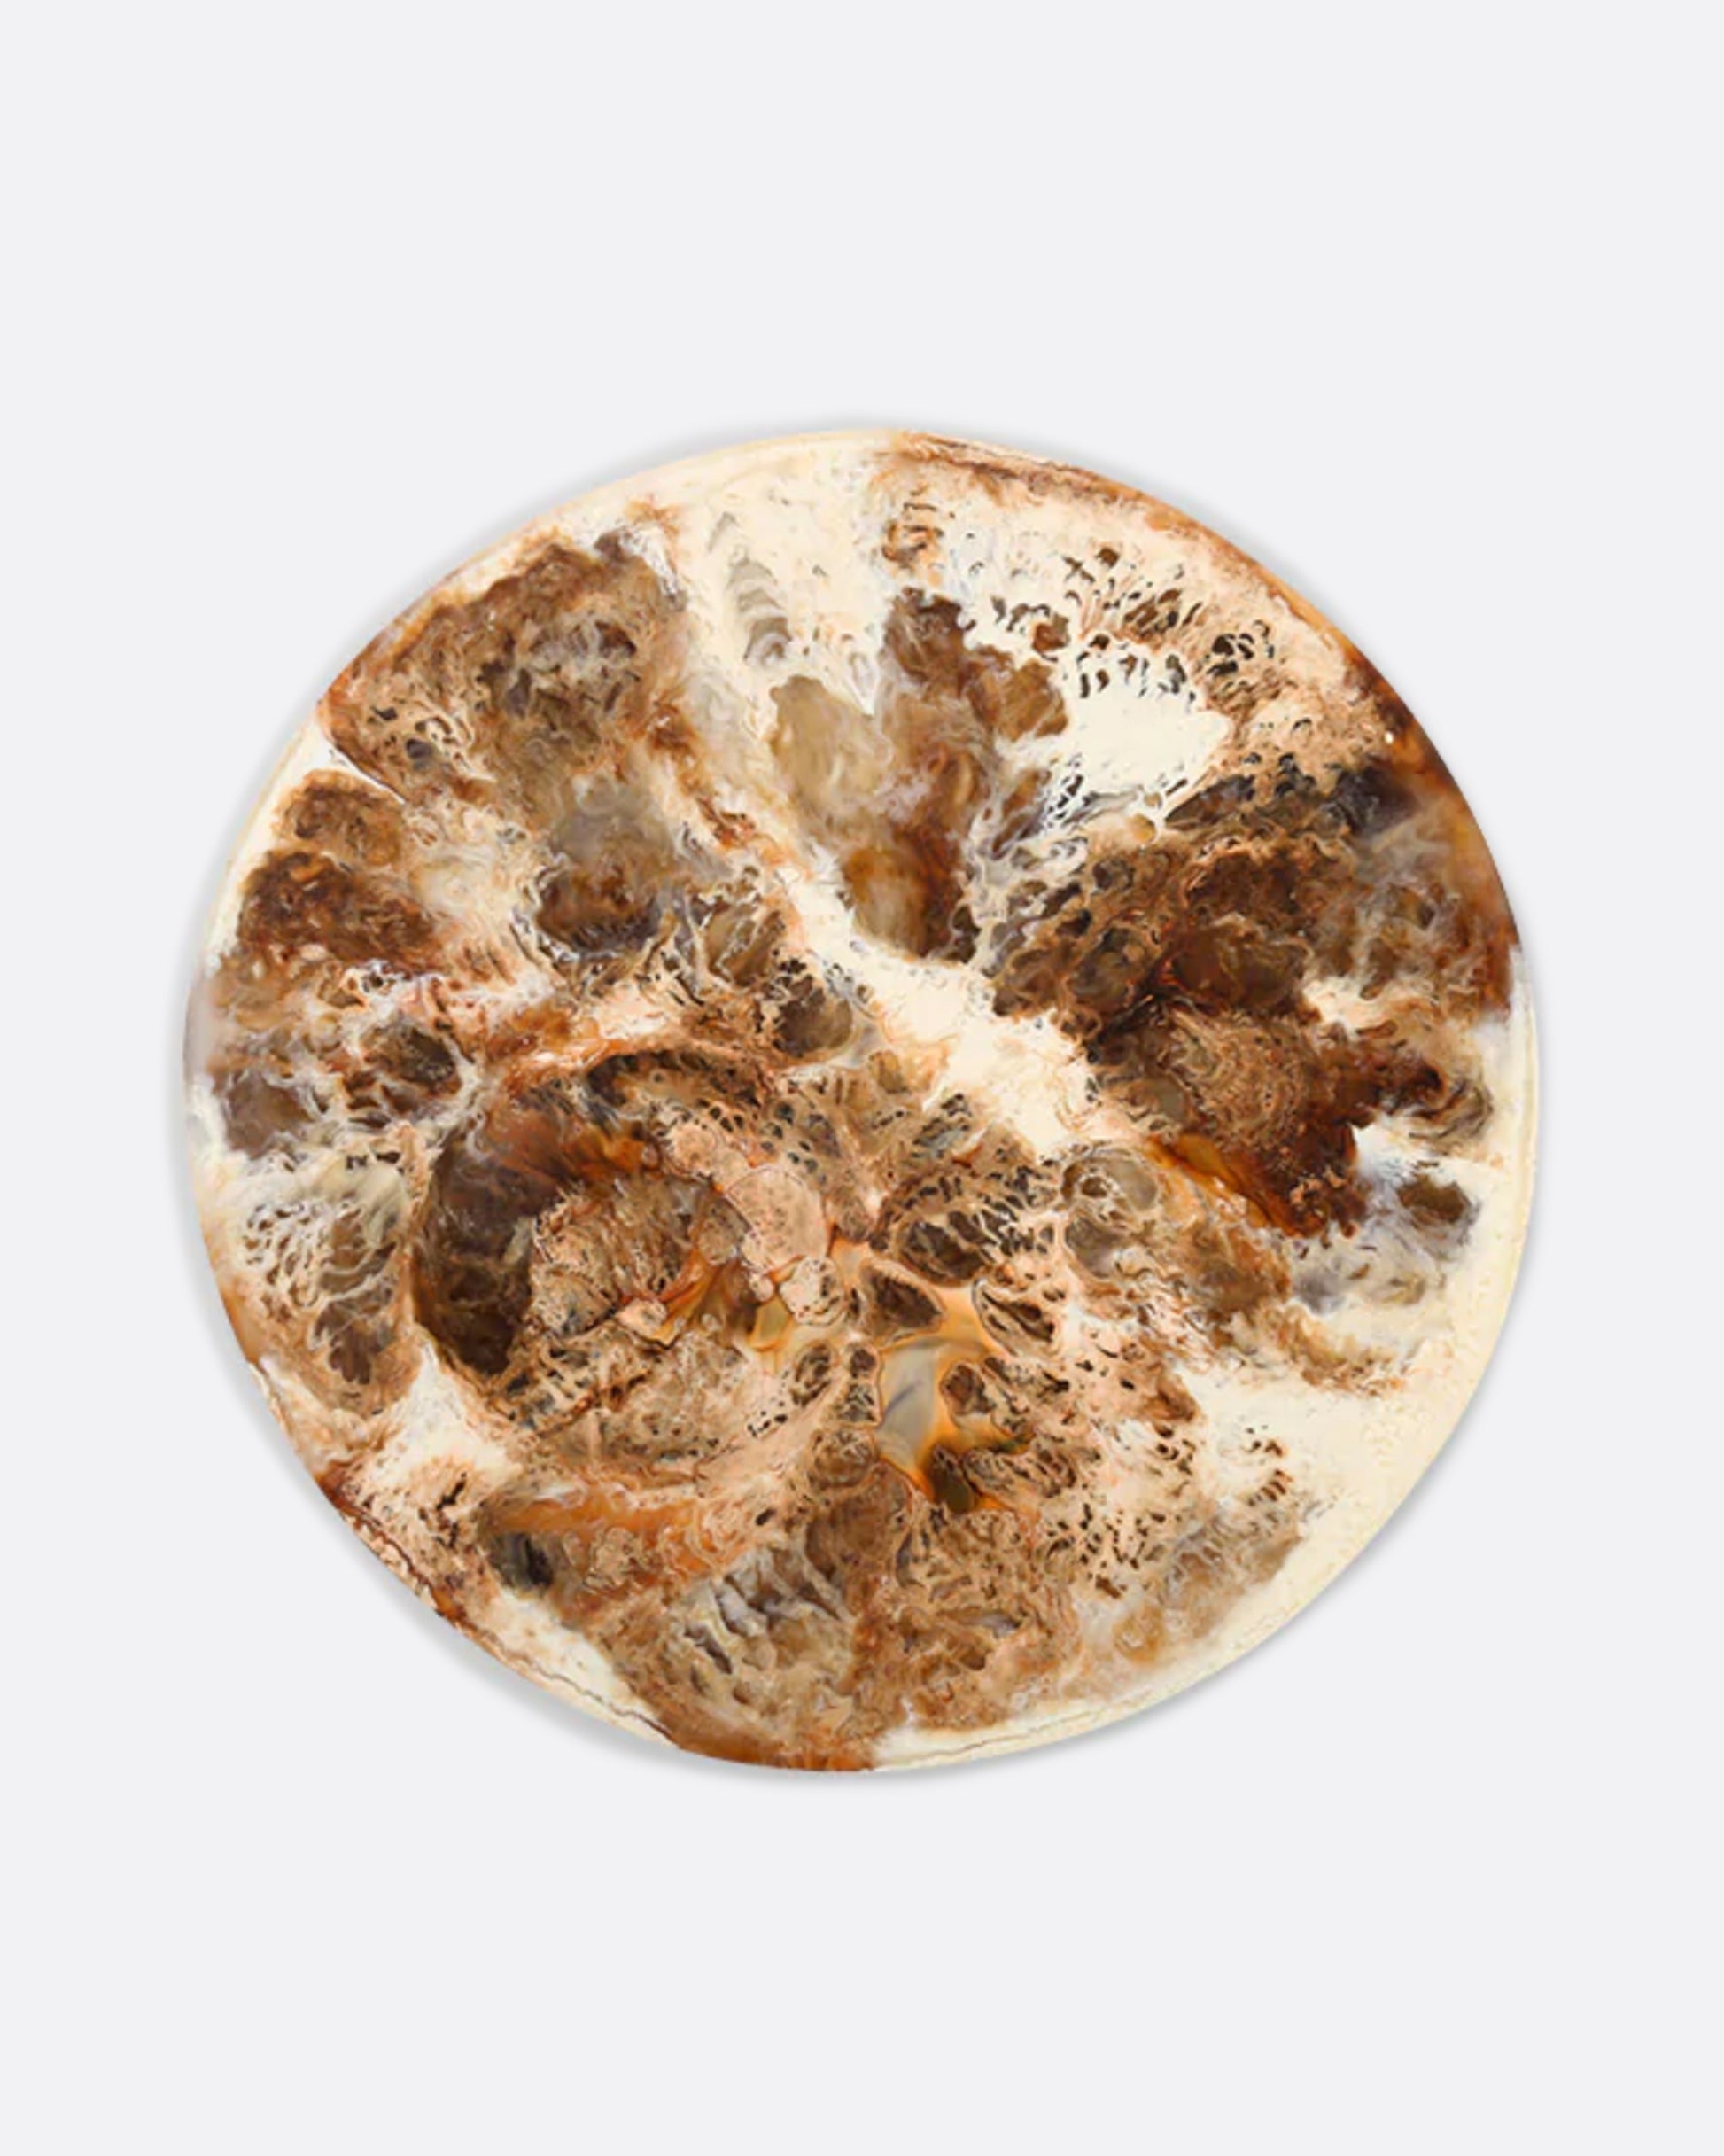 A round brown and white resin platter with a round indentation, shown from above.